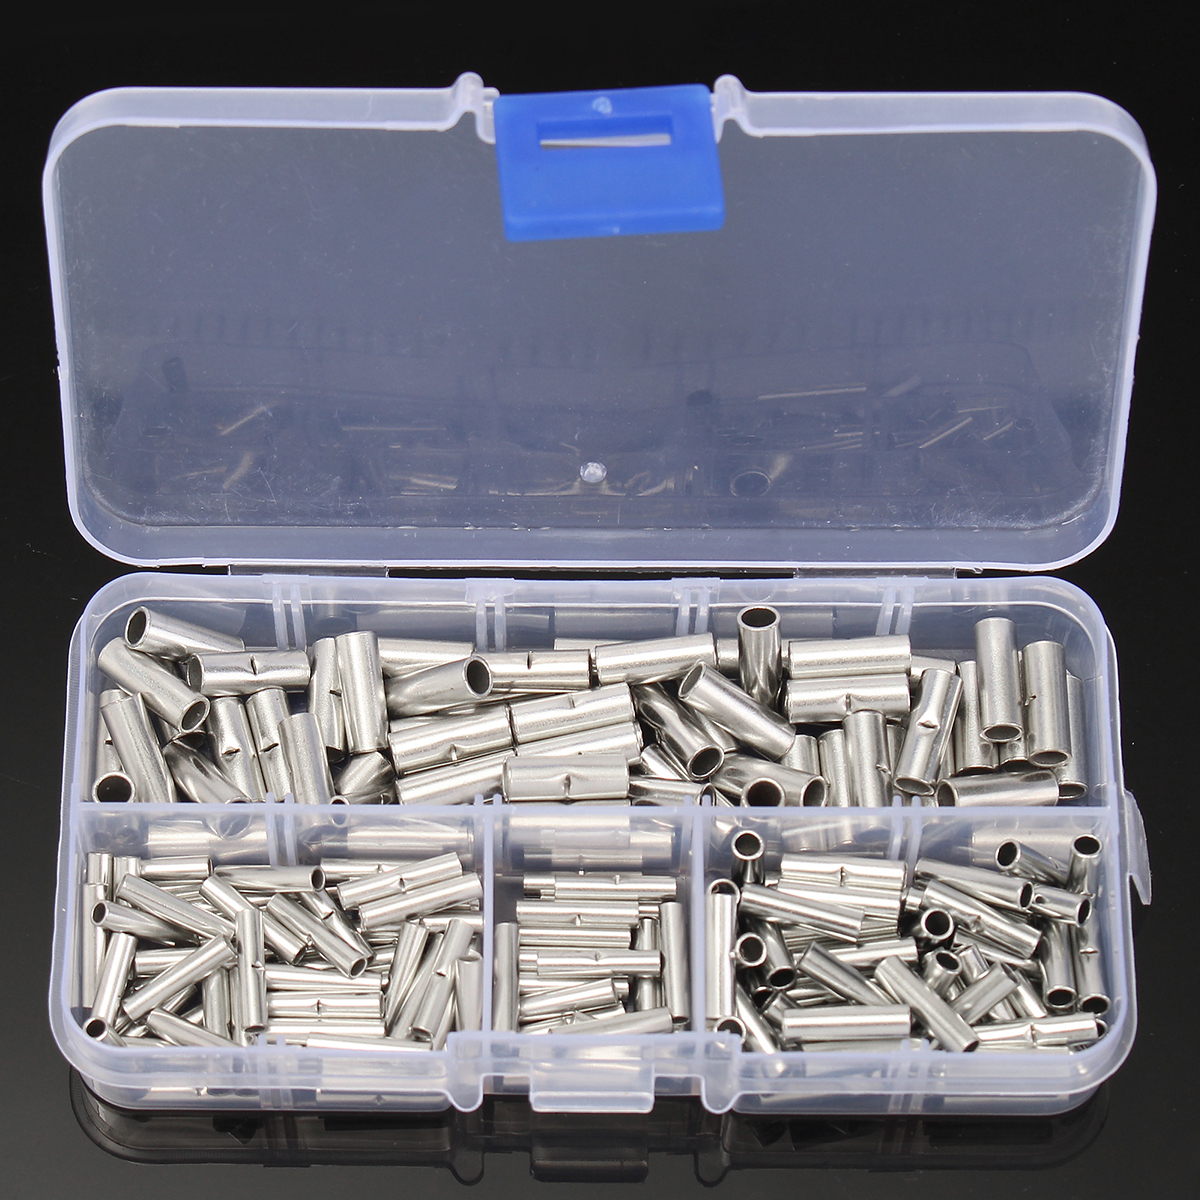 200pcs Of Copper Butt Splice Connector 22 10awg Tinned Crimp Terminal Set Online Shopping